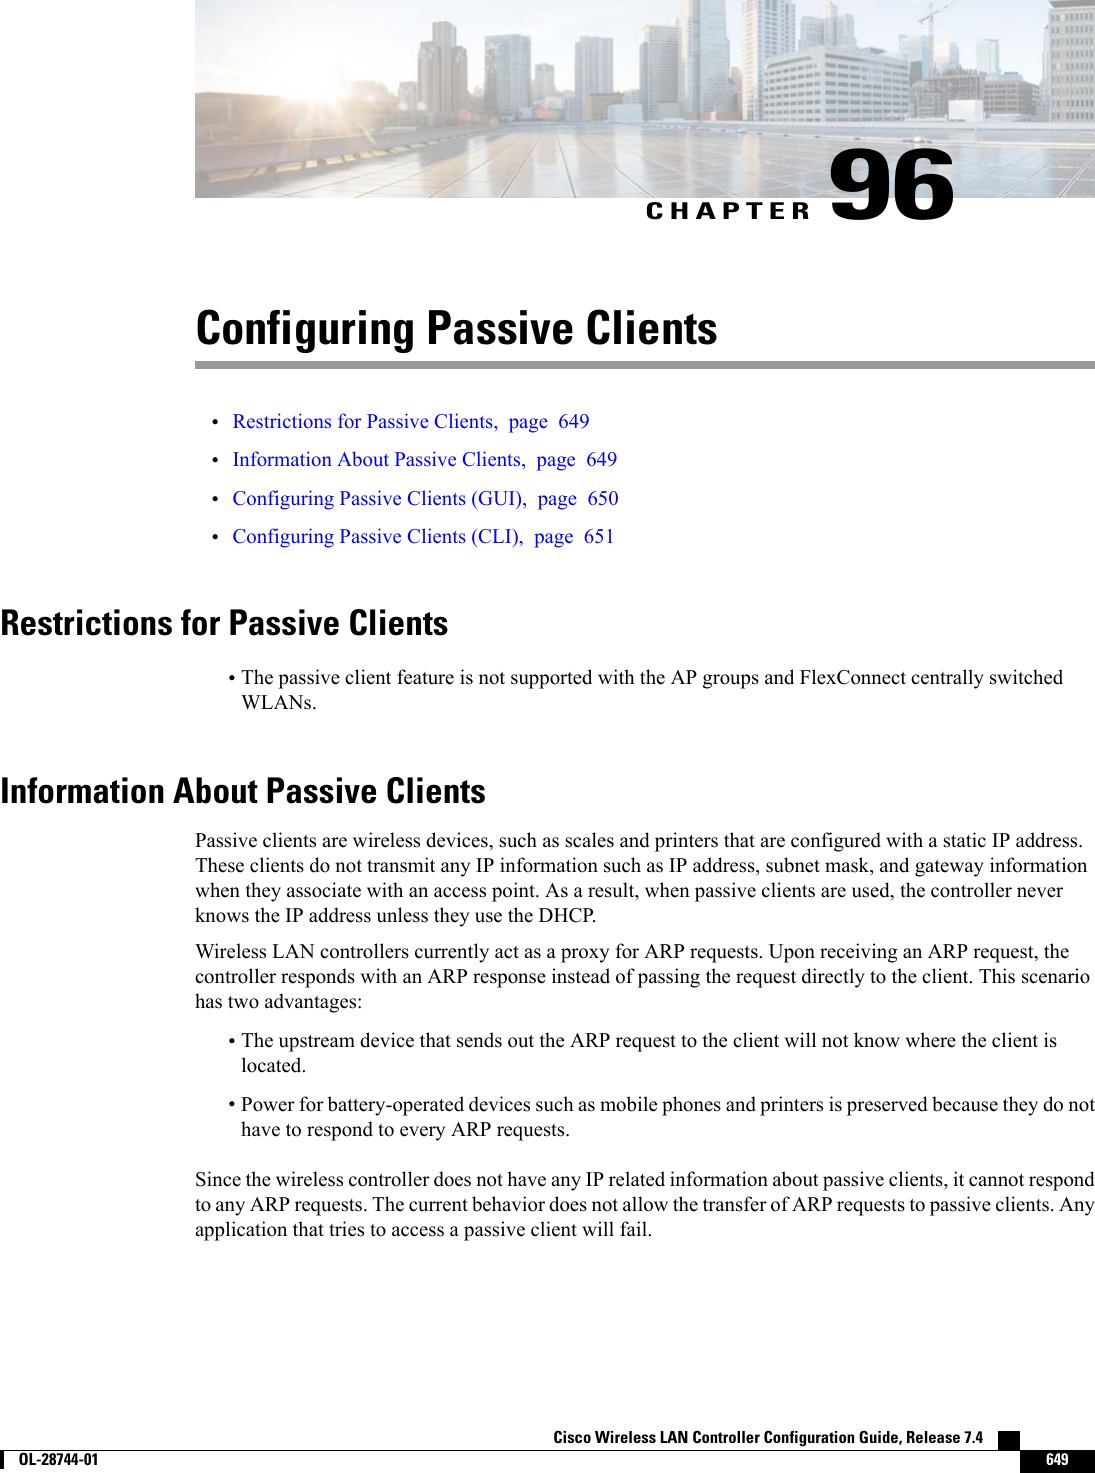 CHAPTER 96Configuring Passive Clients•Restrictions for Passive Clients, page 649•Information About Passive Clients, page 649•Configuring Passive Clients (GUI), page 650•Configuring Passive Clients (CLI), page 651Restrictions for Passive Clients•The passive client feature is not supported with the AP groups and FlexConnect centrally switchedWLANs.Information About Passive ClientsPassive clients are wireless devices, such as scales and printers that are configured with a static IP address.These clients do not transmit any IP information such as IP address, subnet mask, and gateway informationwhen they associate with an access point. As a result, when passive clients are used, the controller neverknows the IP address unless they use the DHCP.Wireless LAN controllers currently act as a proxy for ARP requests. Upon receiving an ARP request, thecontroller responds with an ARP response instead of passing the request directly to the client. This scenariohas two advantages:•The upstream device that sends out the ARP request to the client will not know where the client islocated.•Power for battery-operated devices such as mobile phones and printers is preserved because they do nothave to respond to every ARP requests.Since the wireless controller does not have any IP related information about passive clients, it cannot respondto any ARP requests. The current behavior does not allow the transfer of ARP requests to passive clients. Anyapplication that tries to access a passive client will fail.Cisco Wireless LAN Controller Configuration Guide, Release 7.4        OL-28744-01 649